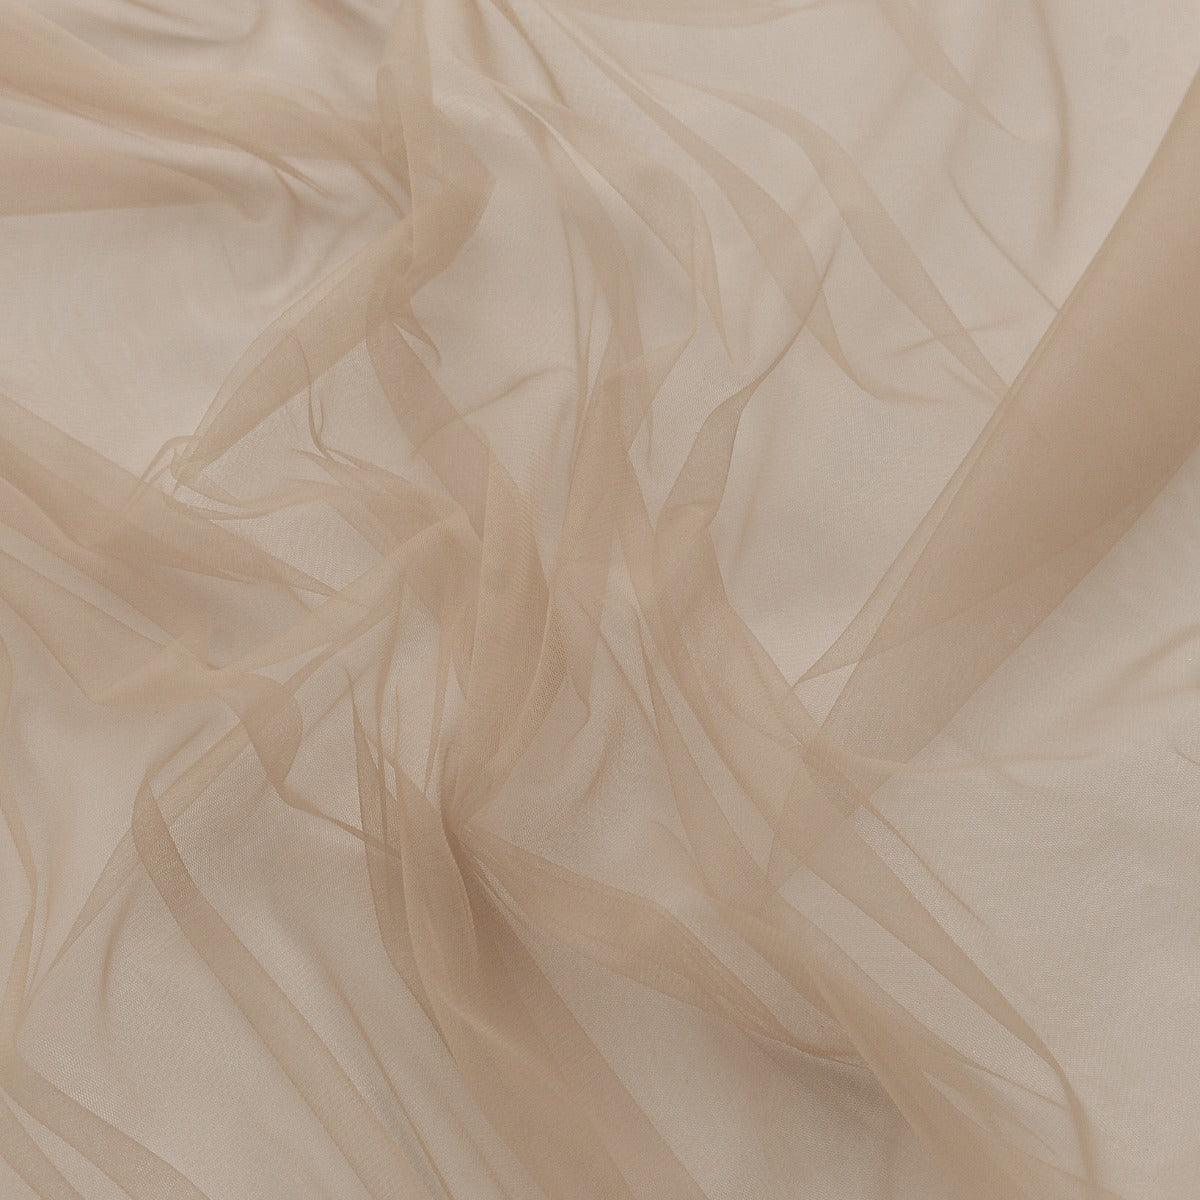 Tulle - Nude Inchis